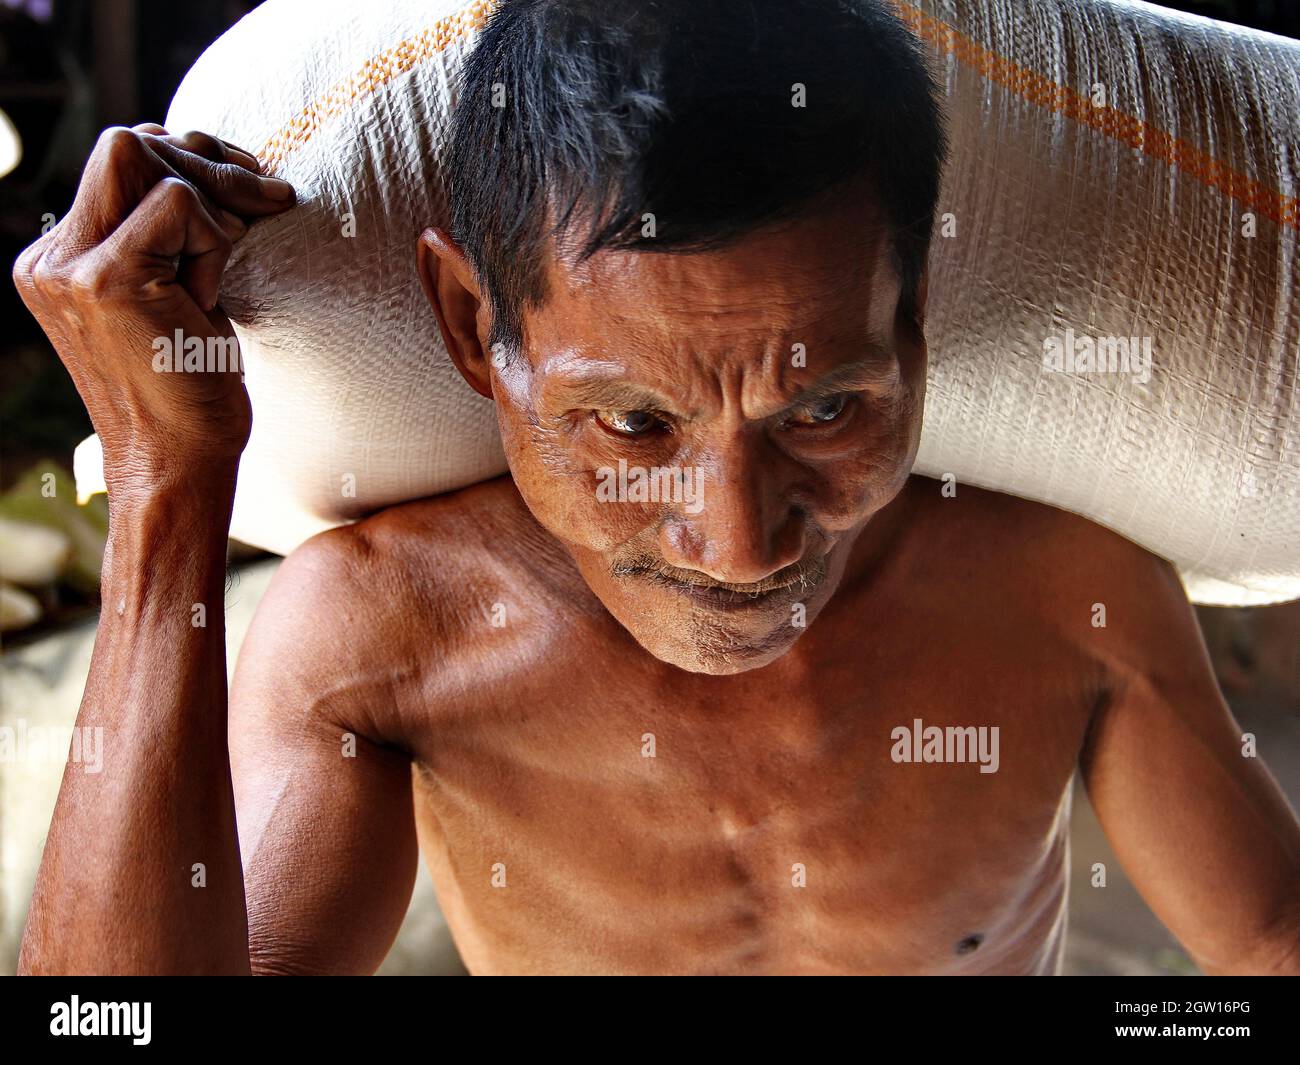 A man with a hair lip carrying a heavy sack of rice in a traditional market in Padang City, West Sumatra, Indonesia. The man has a cleft palate. Stock Photo